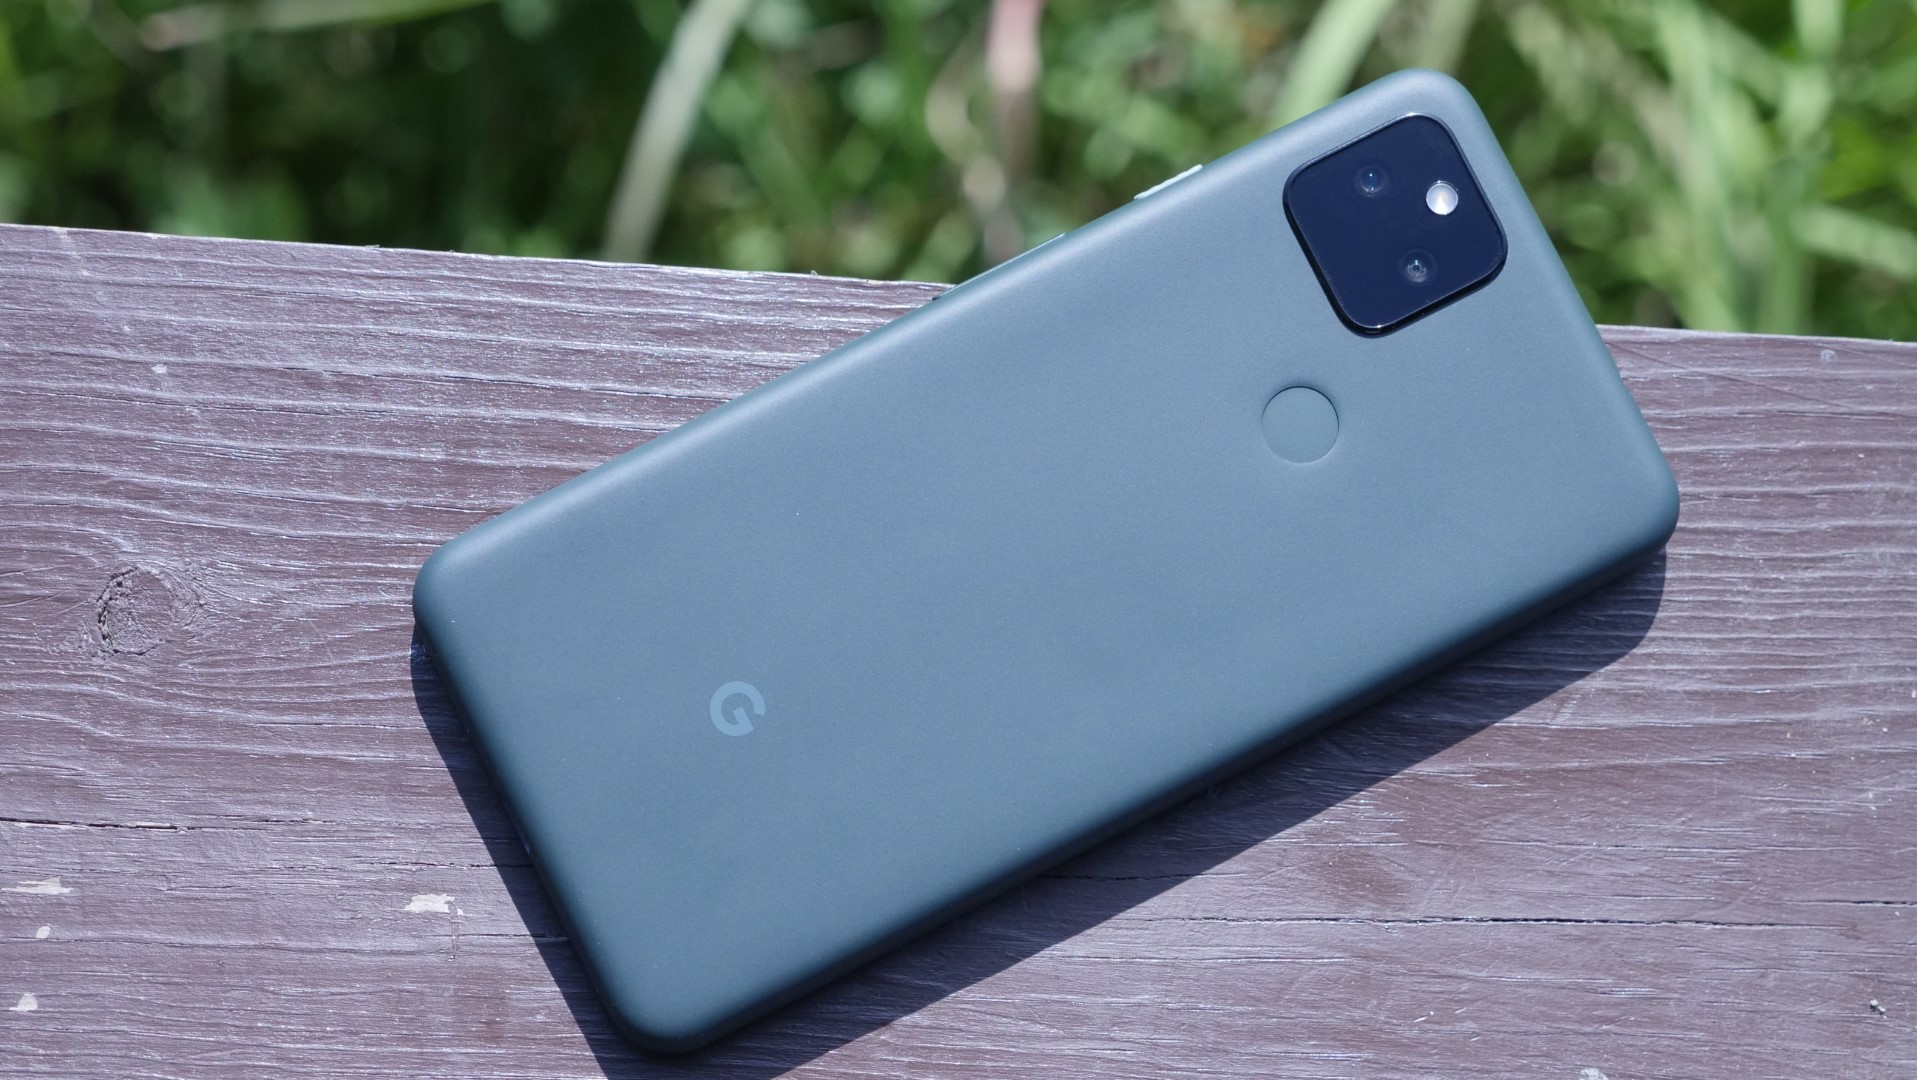 Google Pixel 5 vs Google Pixel 4: which flagship Android phone is for you?